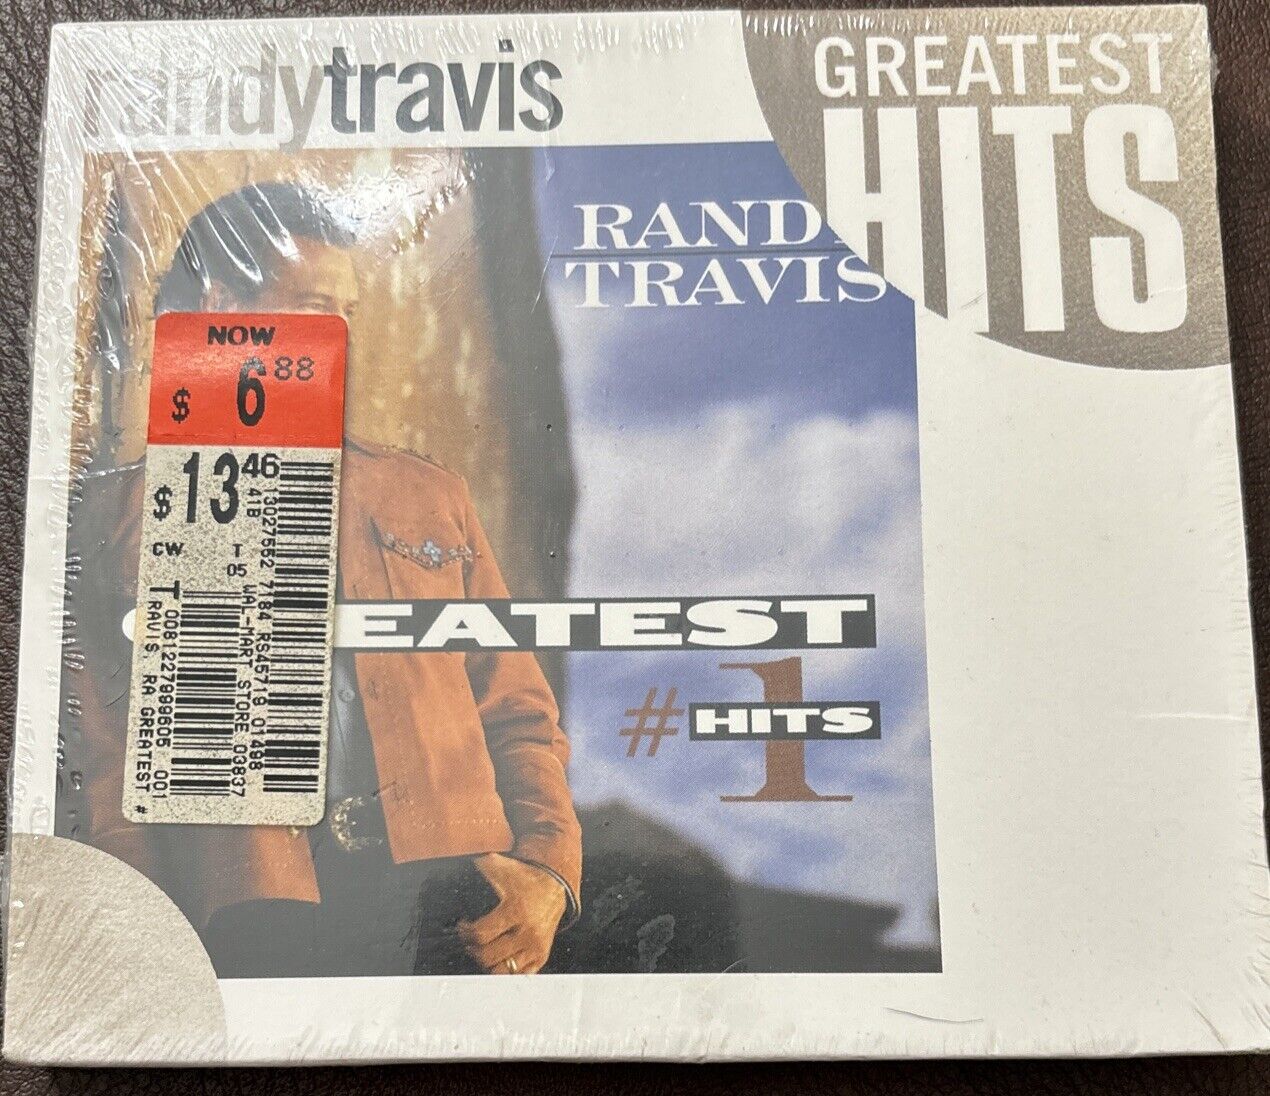 Randy Travis Greatest #1 Hits CD 1982 On The Other Hand Told You So New Sealed